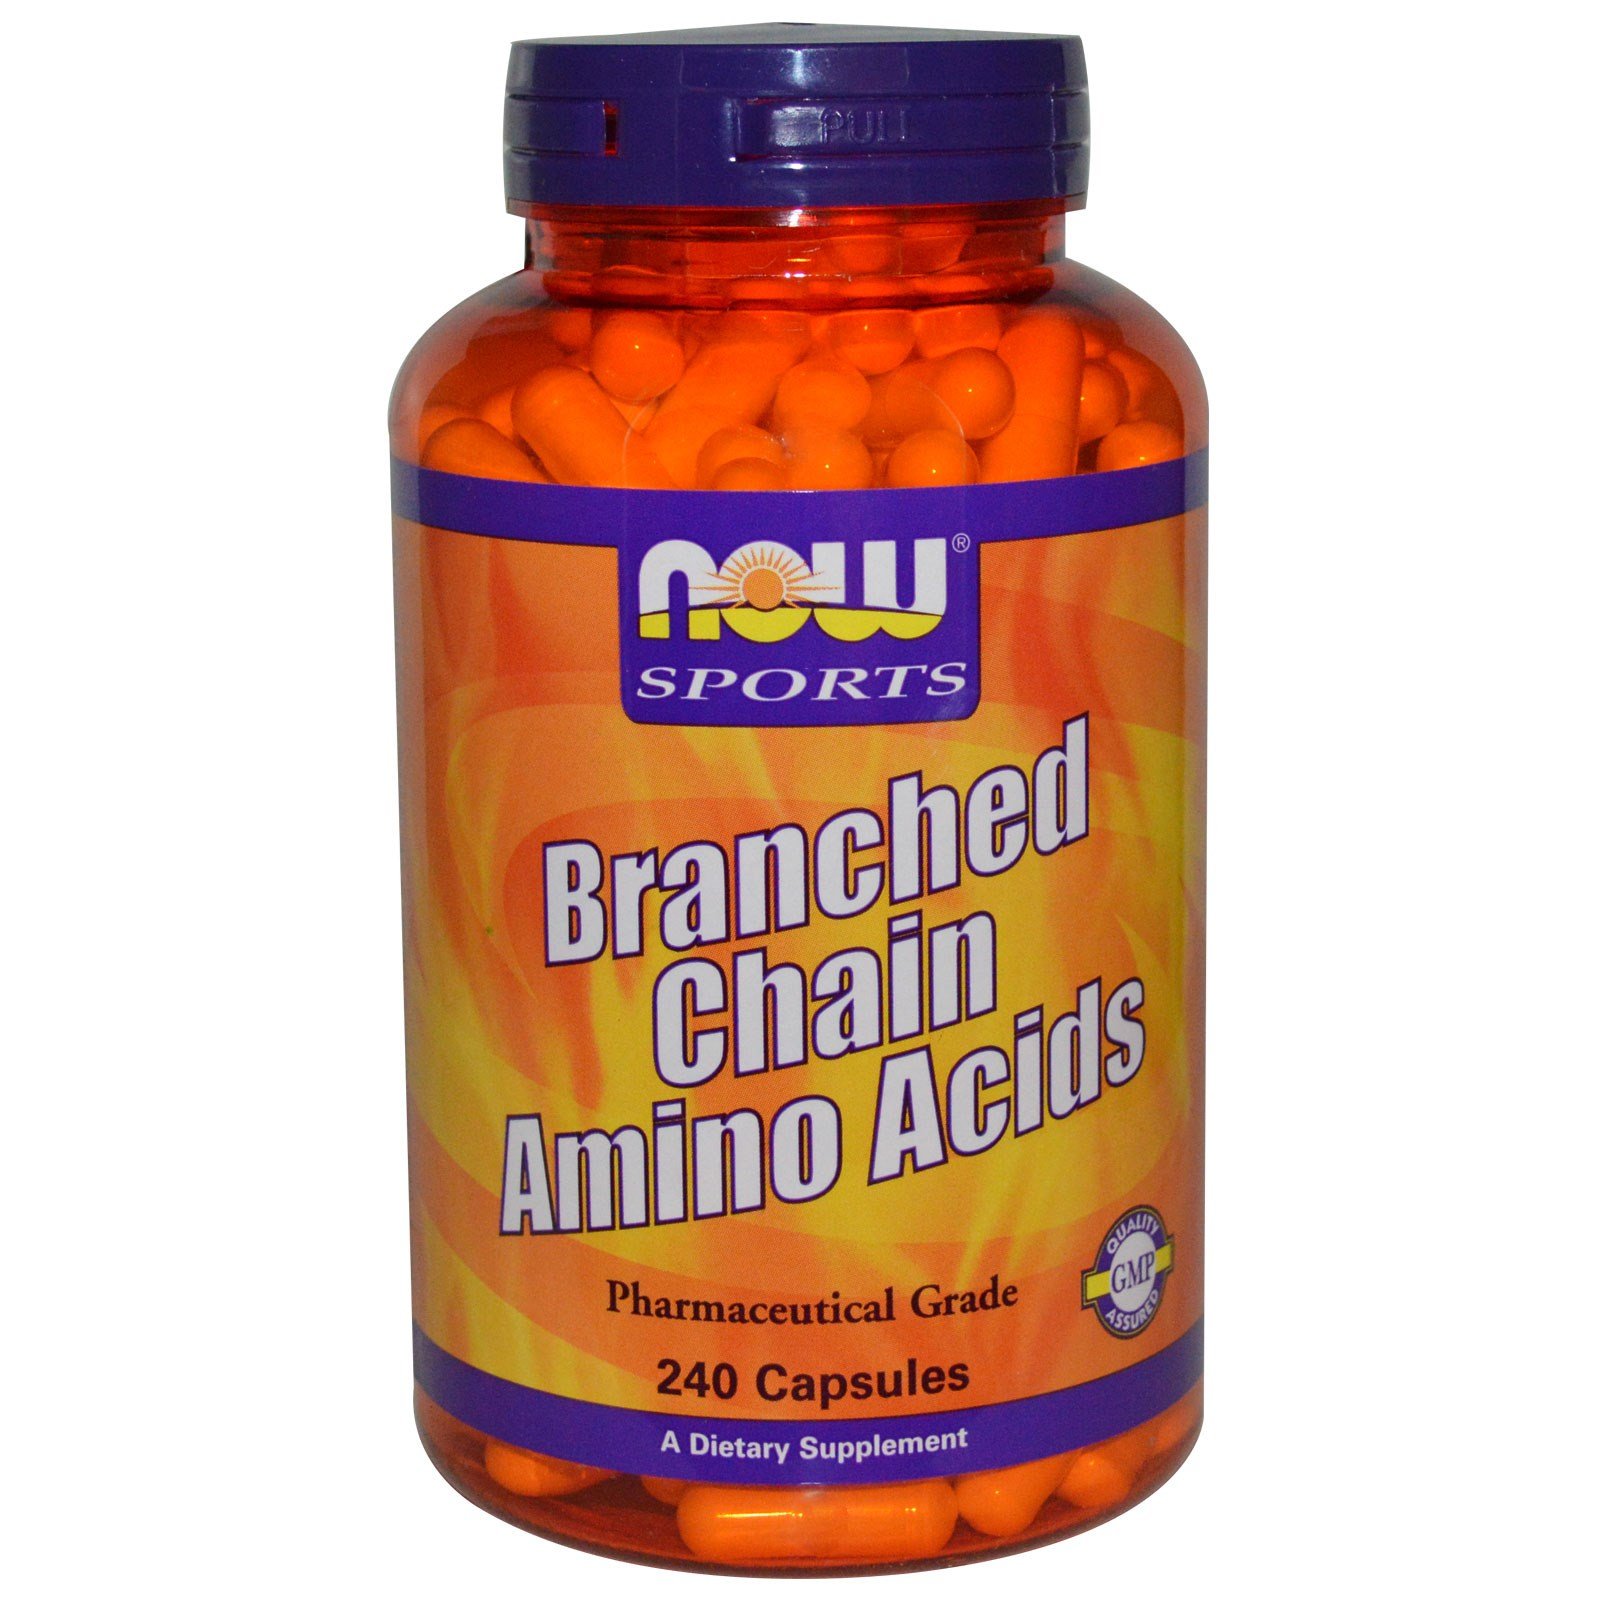 Branched Chain Amino Acids, 240 pcs, Now. BCAA. Weight Loss recovery Anti-catabolic properties Lean muscle mass 